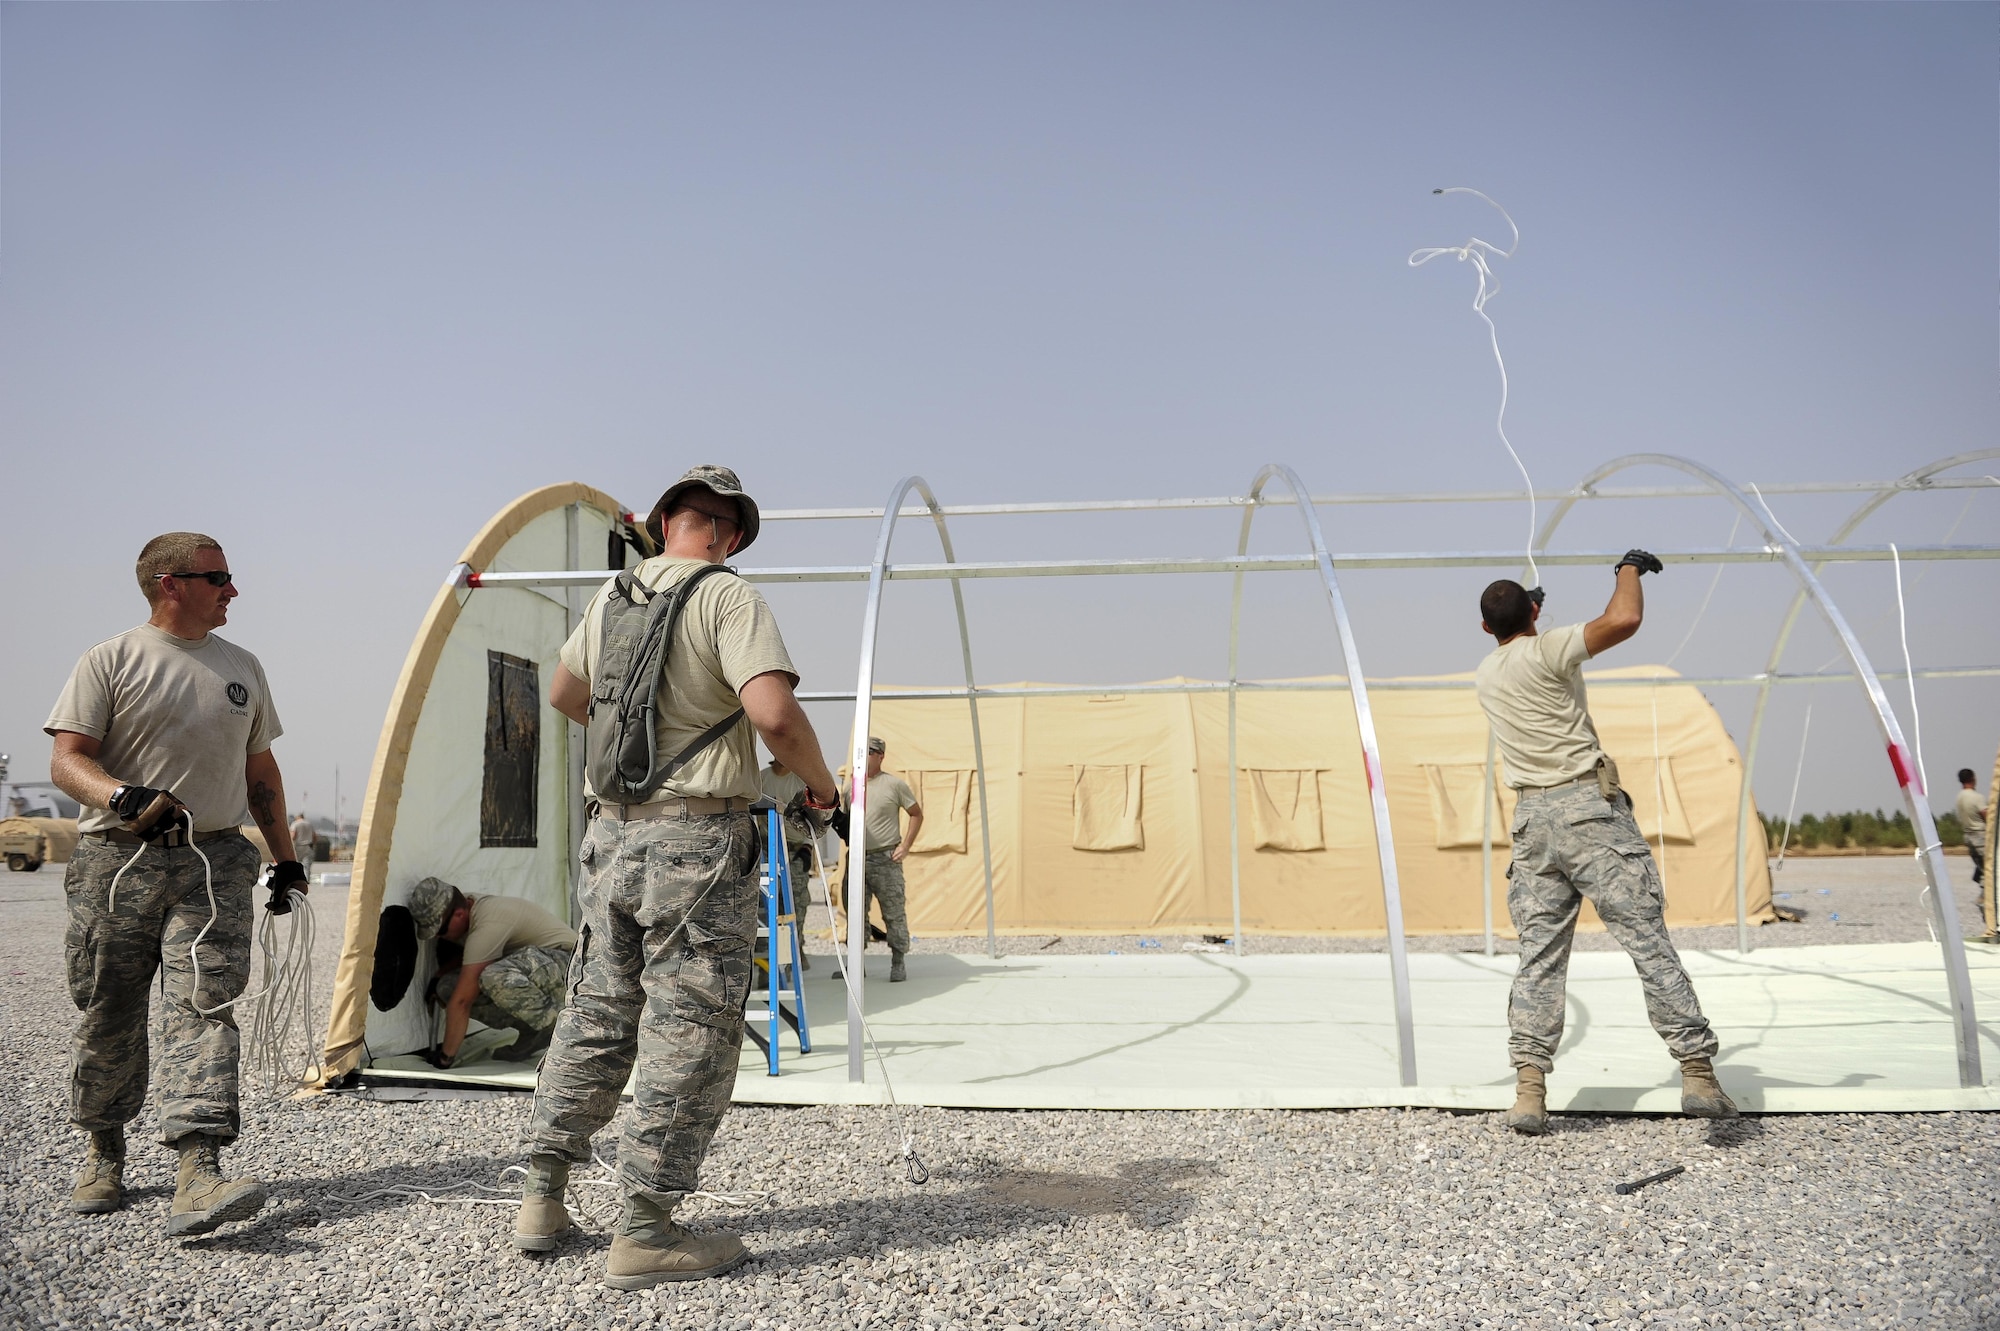 Airmen from the 435th Contingency Response Squadron prepare shelters Sept. 13, 2015, in support of the U.S. Air Force’s personnel recovery mission at Diyarbakir Air Base, Turkey. The 435th CRG mobilizes and deploys advanced combat-ready tactical forces, communications equipment and airfield systems for wartime and contingency operations. The deployment of assets and personnel will enable the Air Force to better assist with recovery of coalition partners, should they need assistance in Syria or Iraq. (U.S. Air Force photo/Airman Cory W. Bush)